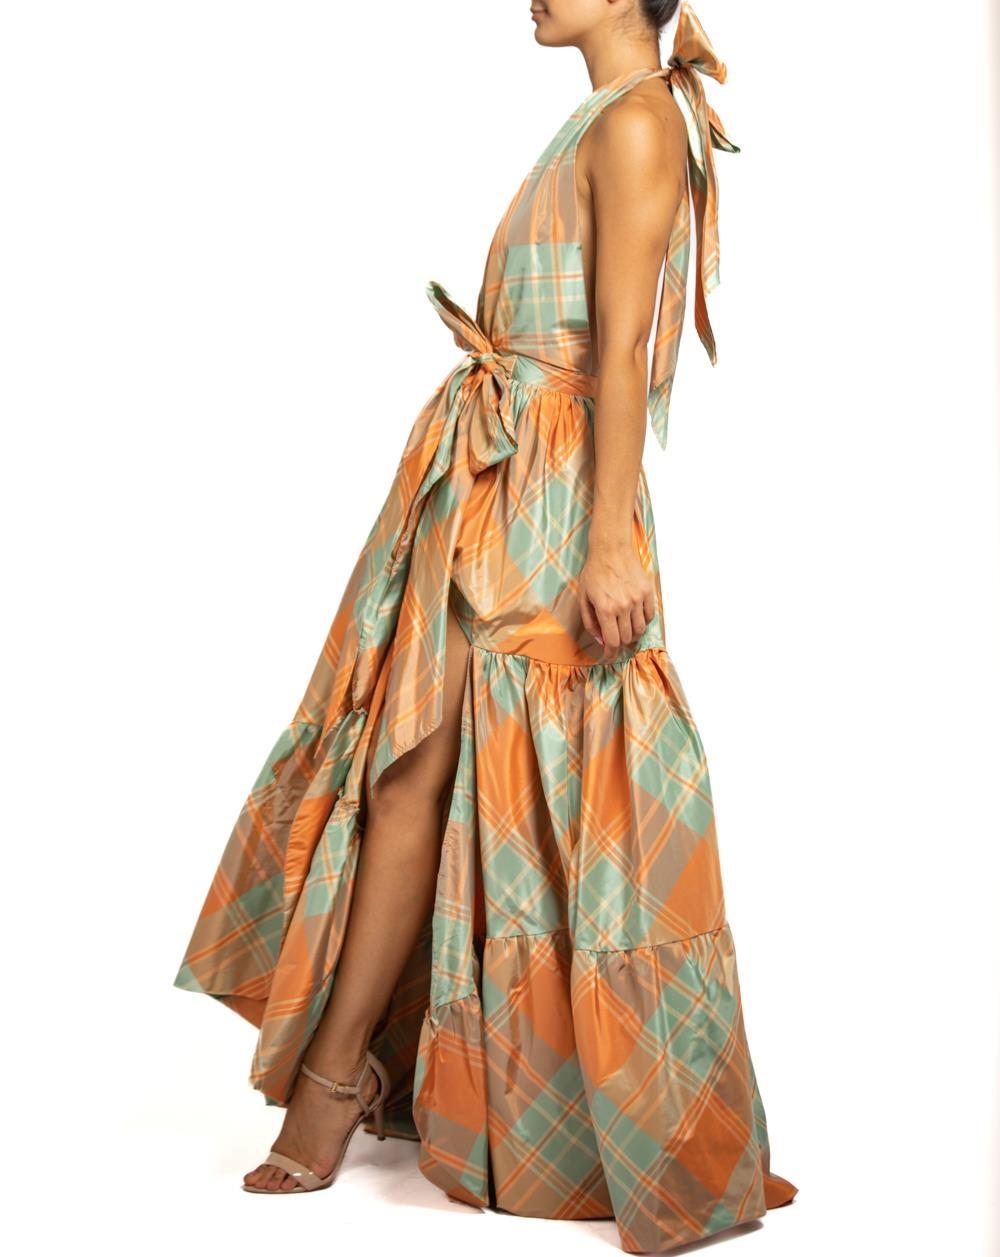 MORPHEW COLLECTION Orange & Aqua Silk Taffeta Plaid Gown MASTER
MORPHEW COLLECTION is made entirely by hand in our NYC Ateliér of rare antique materials sourced from around the globe. Our sustainable vintage materials represent over a century of